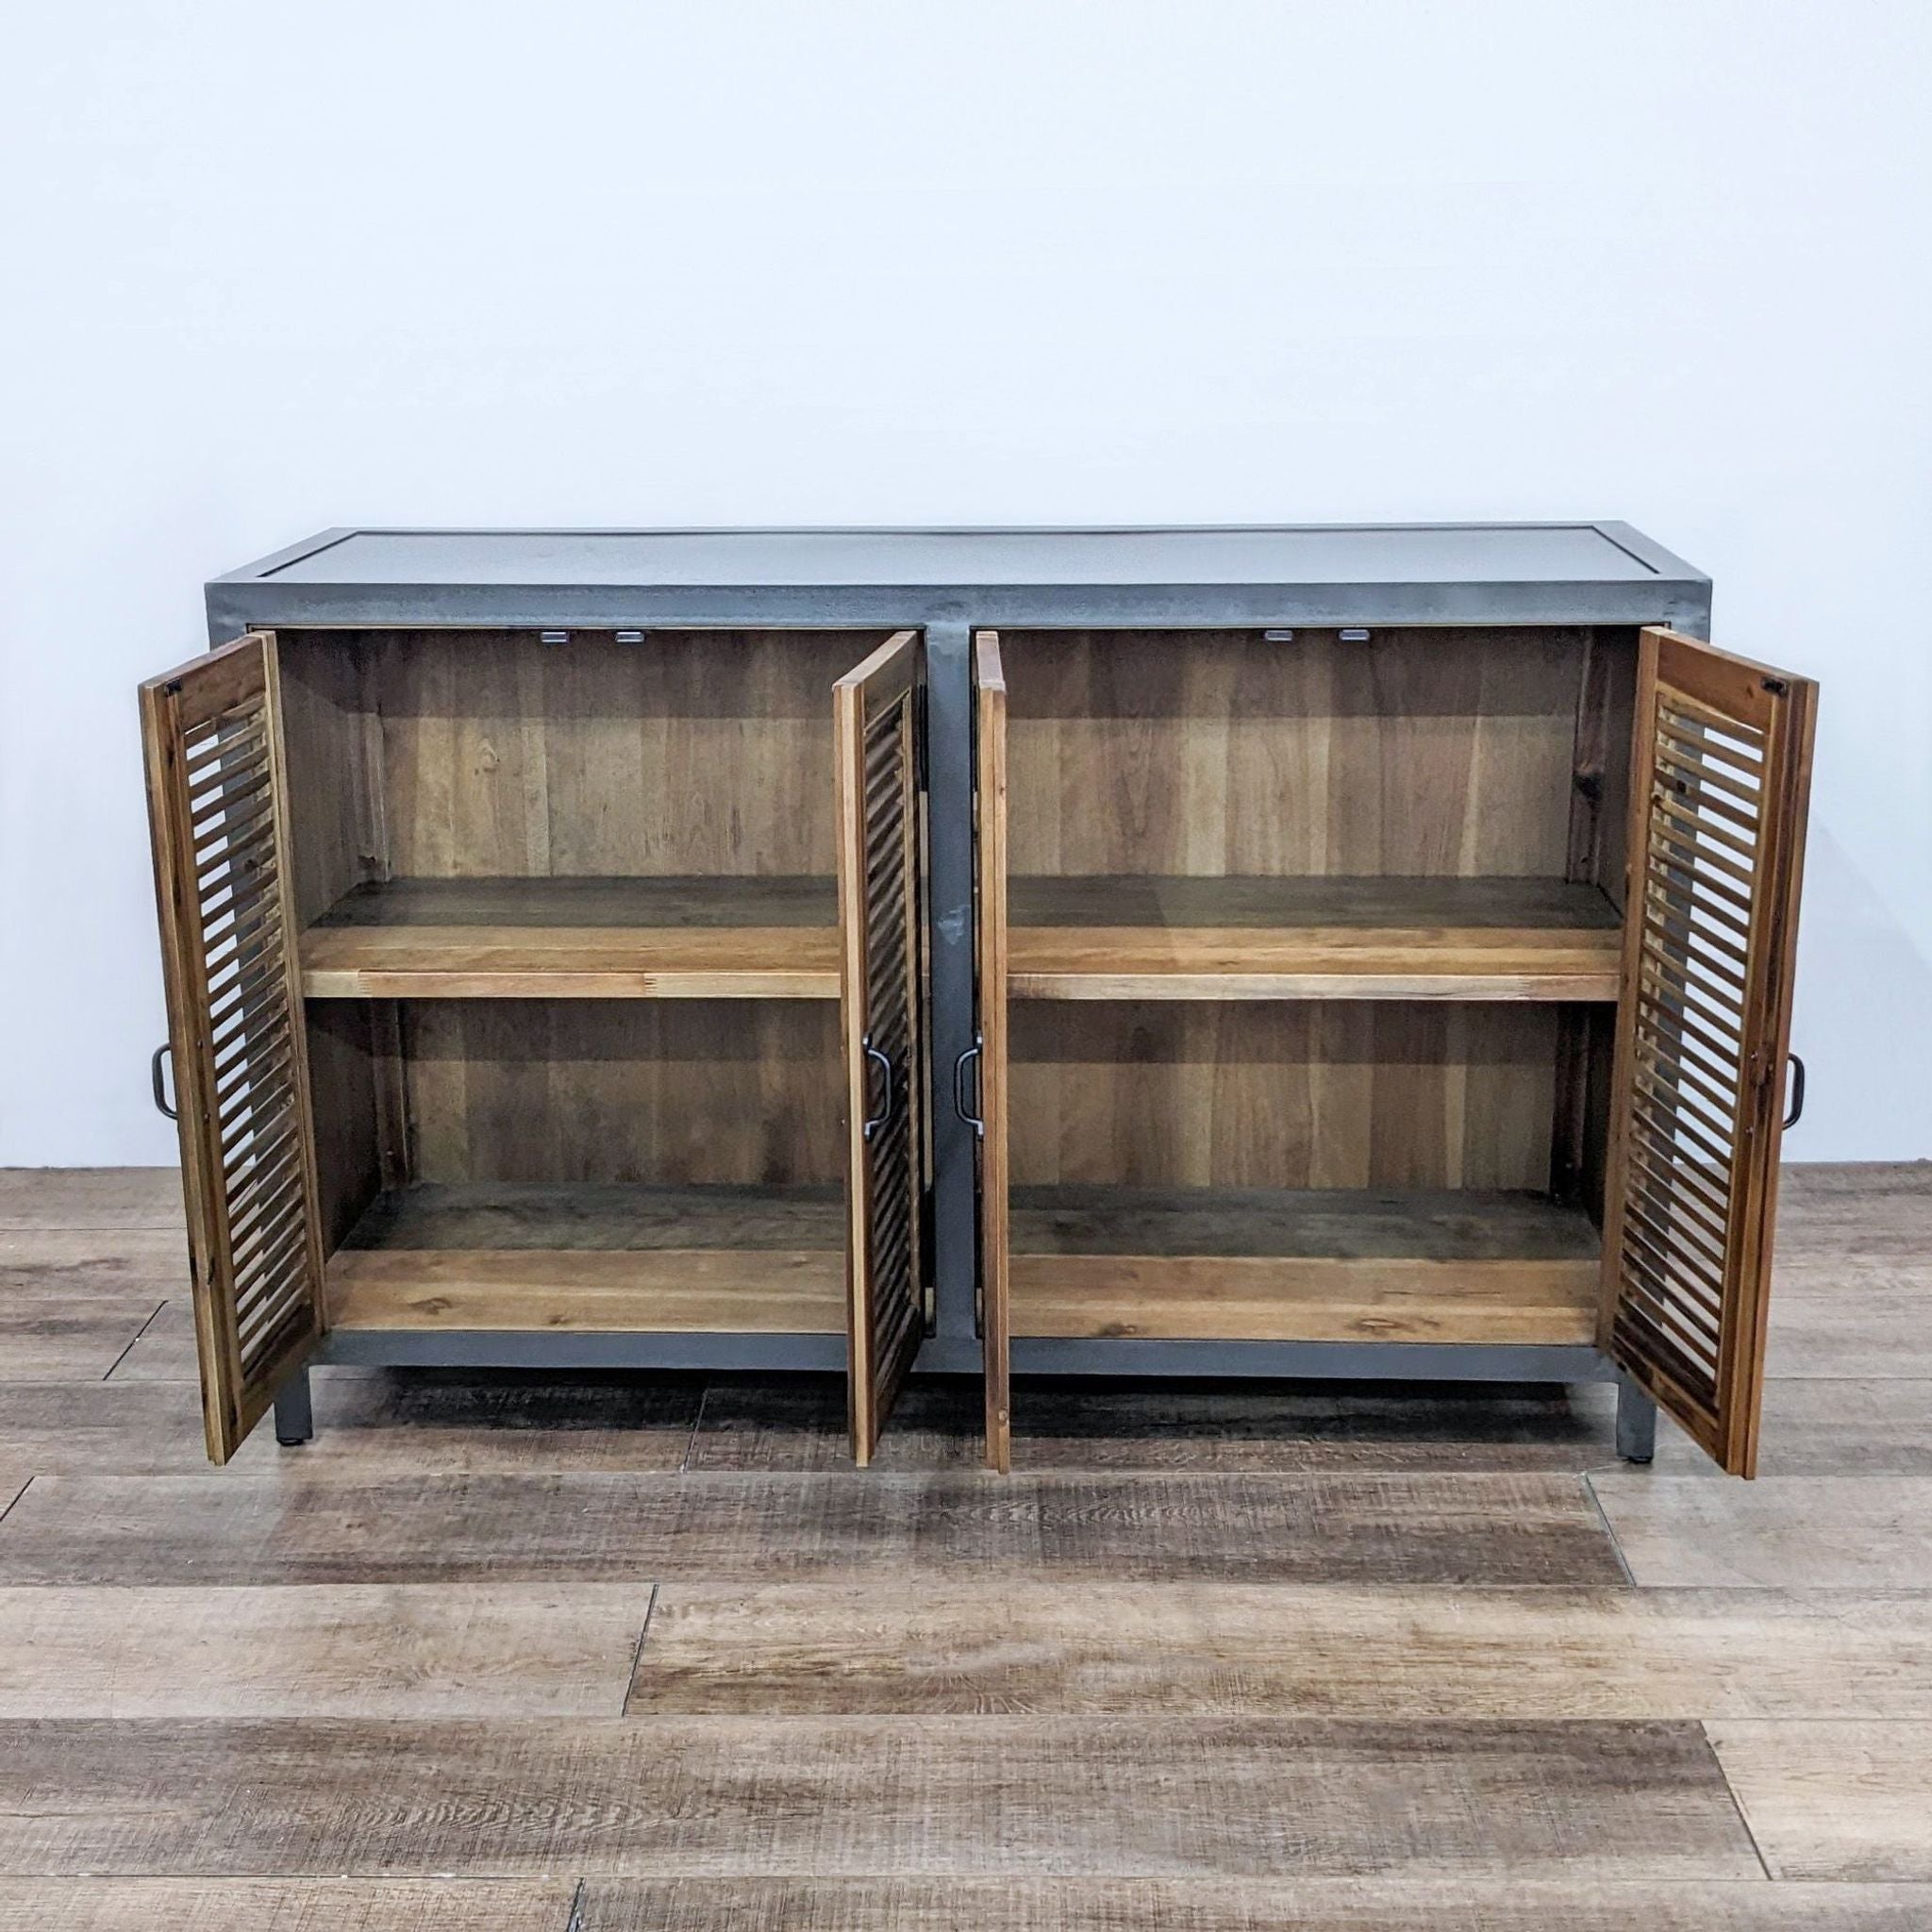 World Market credenza with open louvered doors revealing interior shelves, metal and wood design.